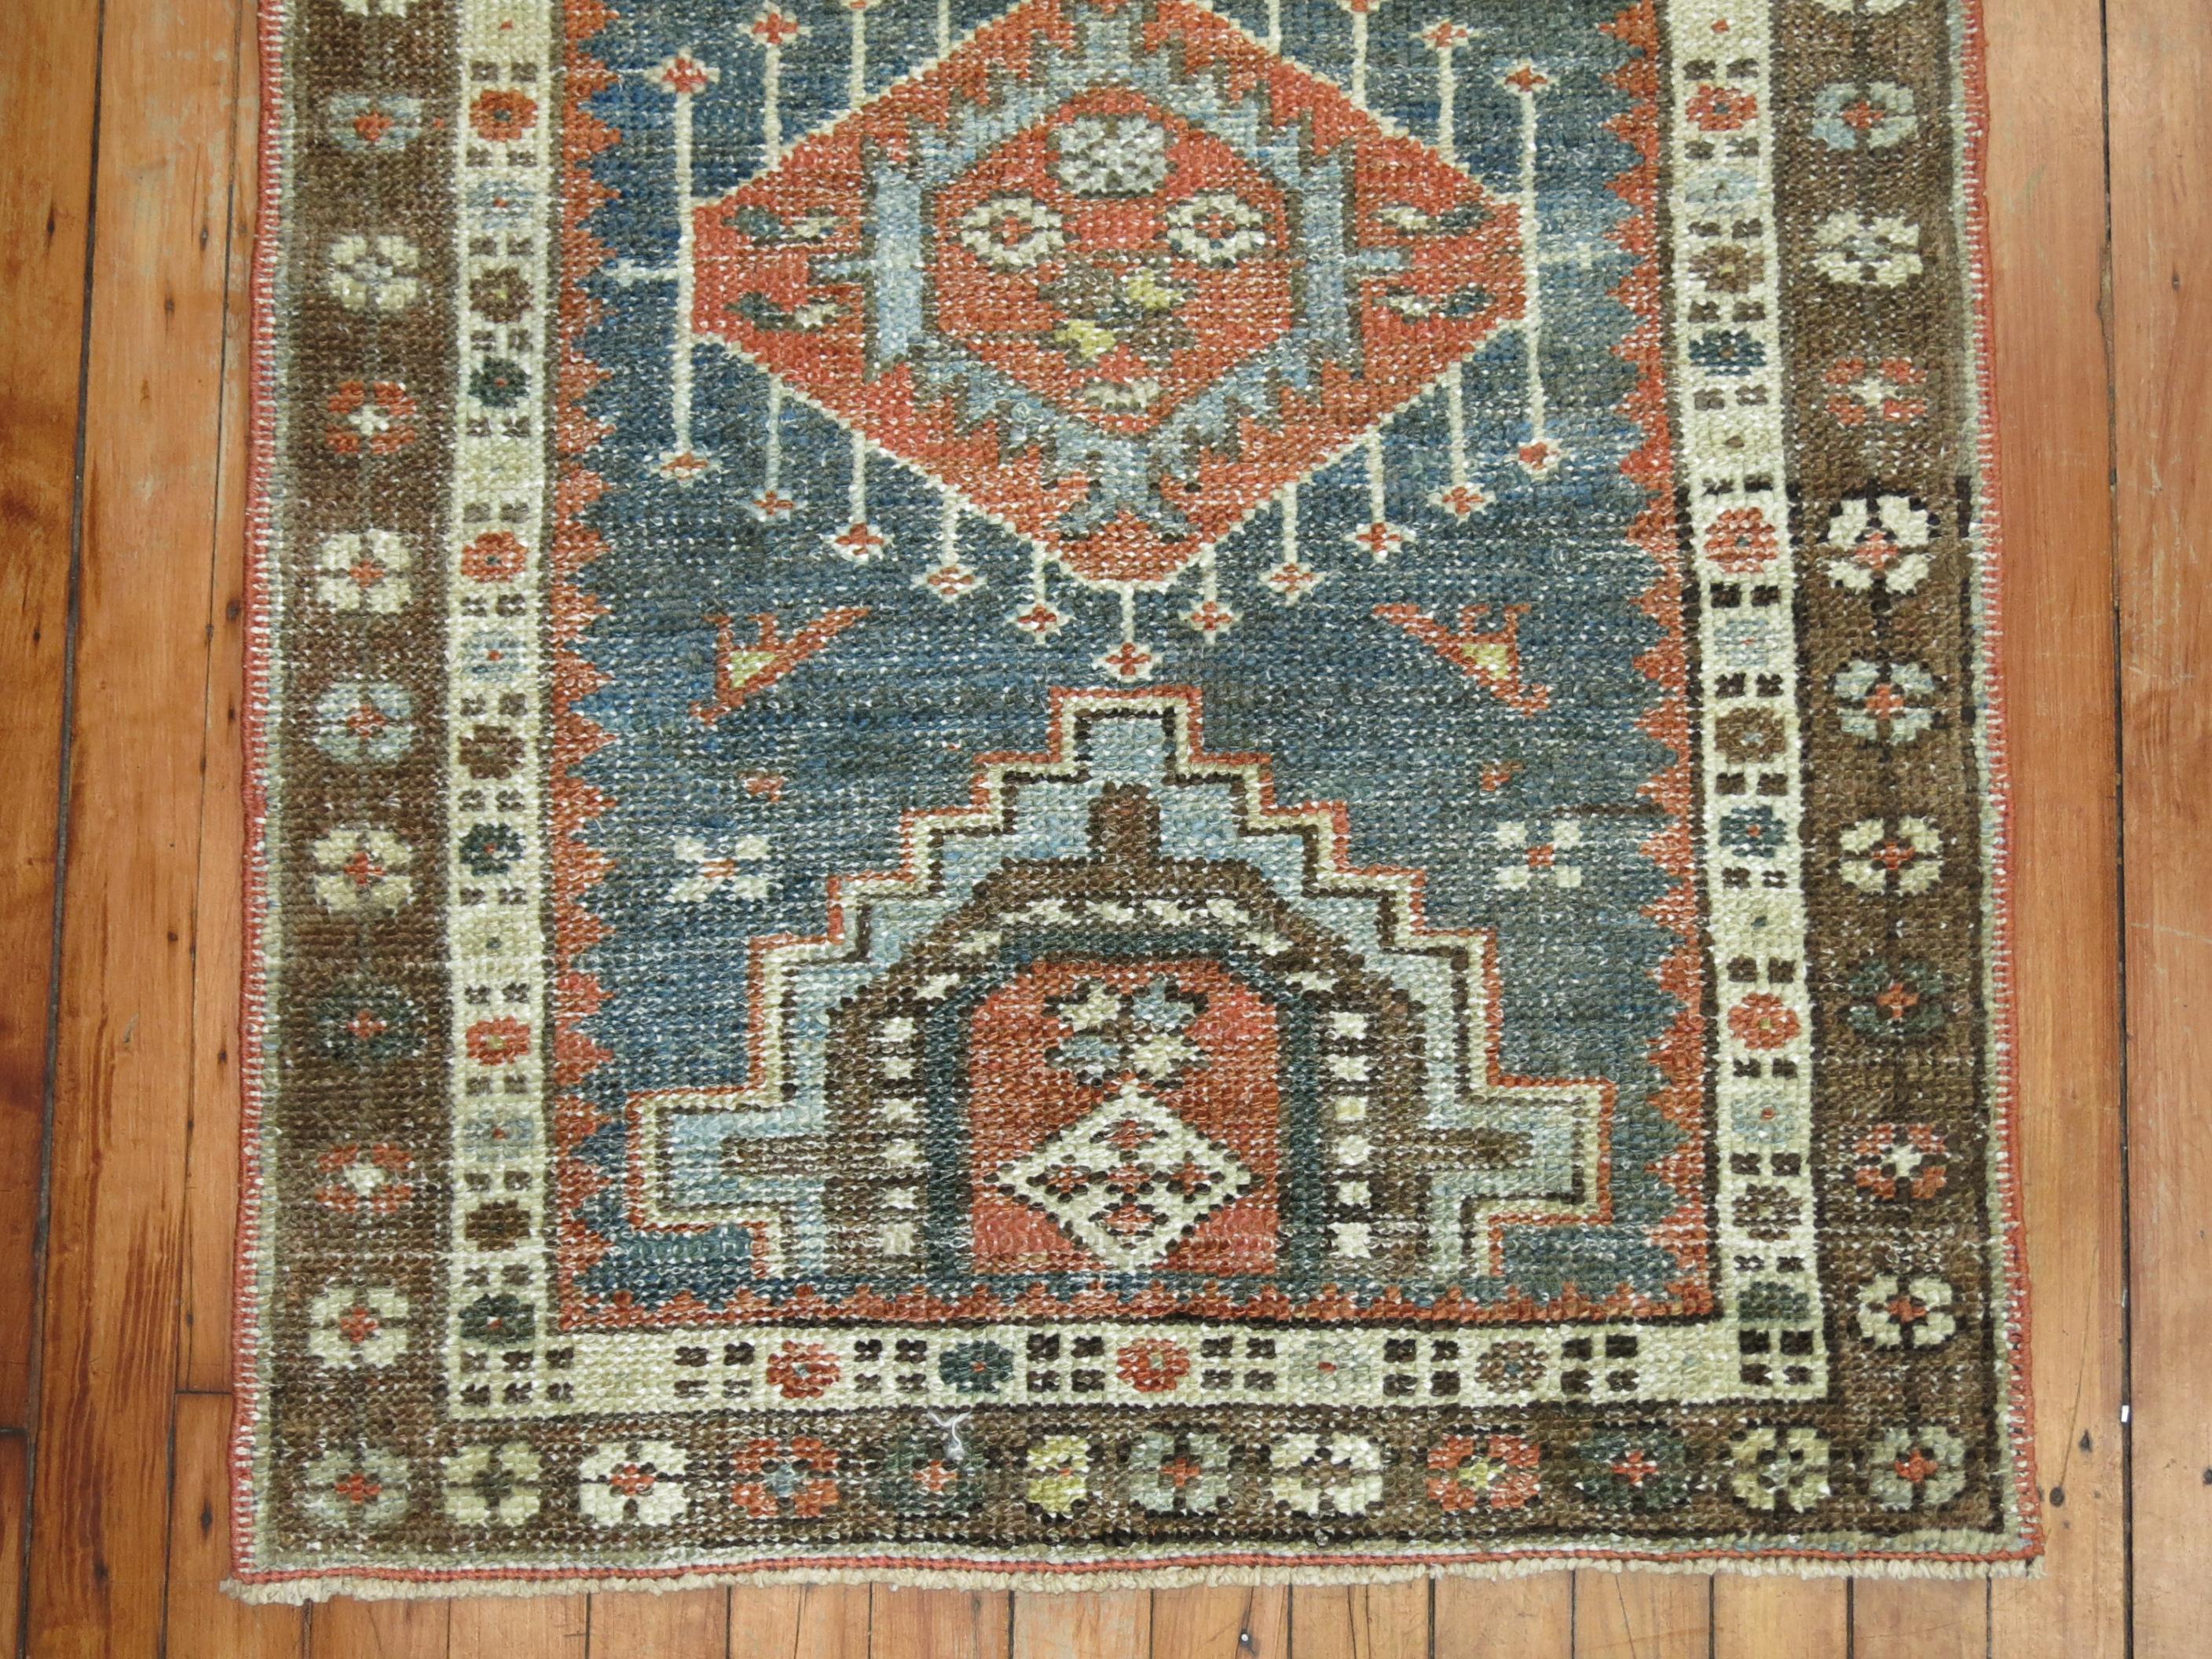 Persian Heriz Tribal scatter rug in rustic tones from the early 20th century

Measures: 2'5” x 4'1”.